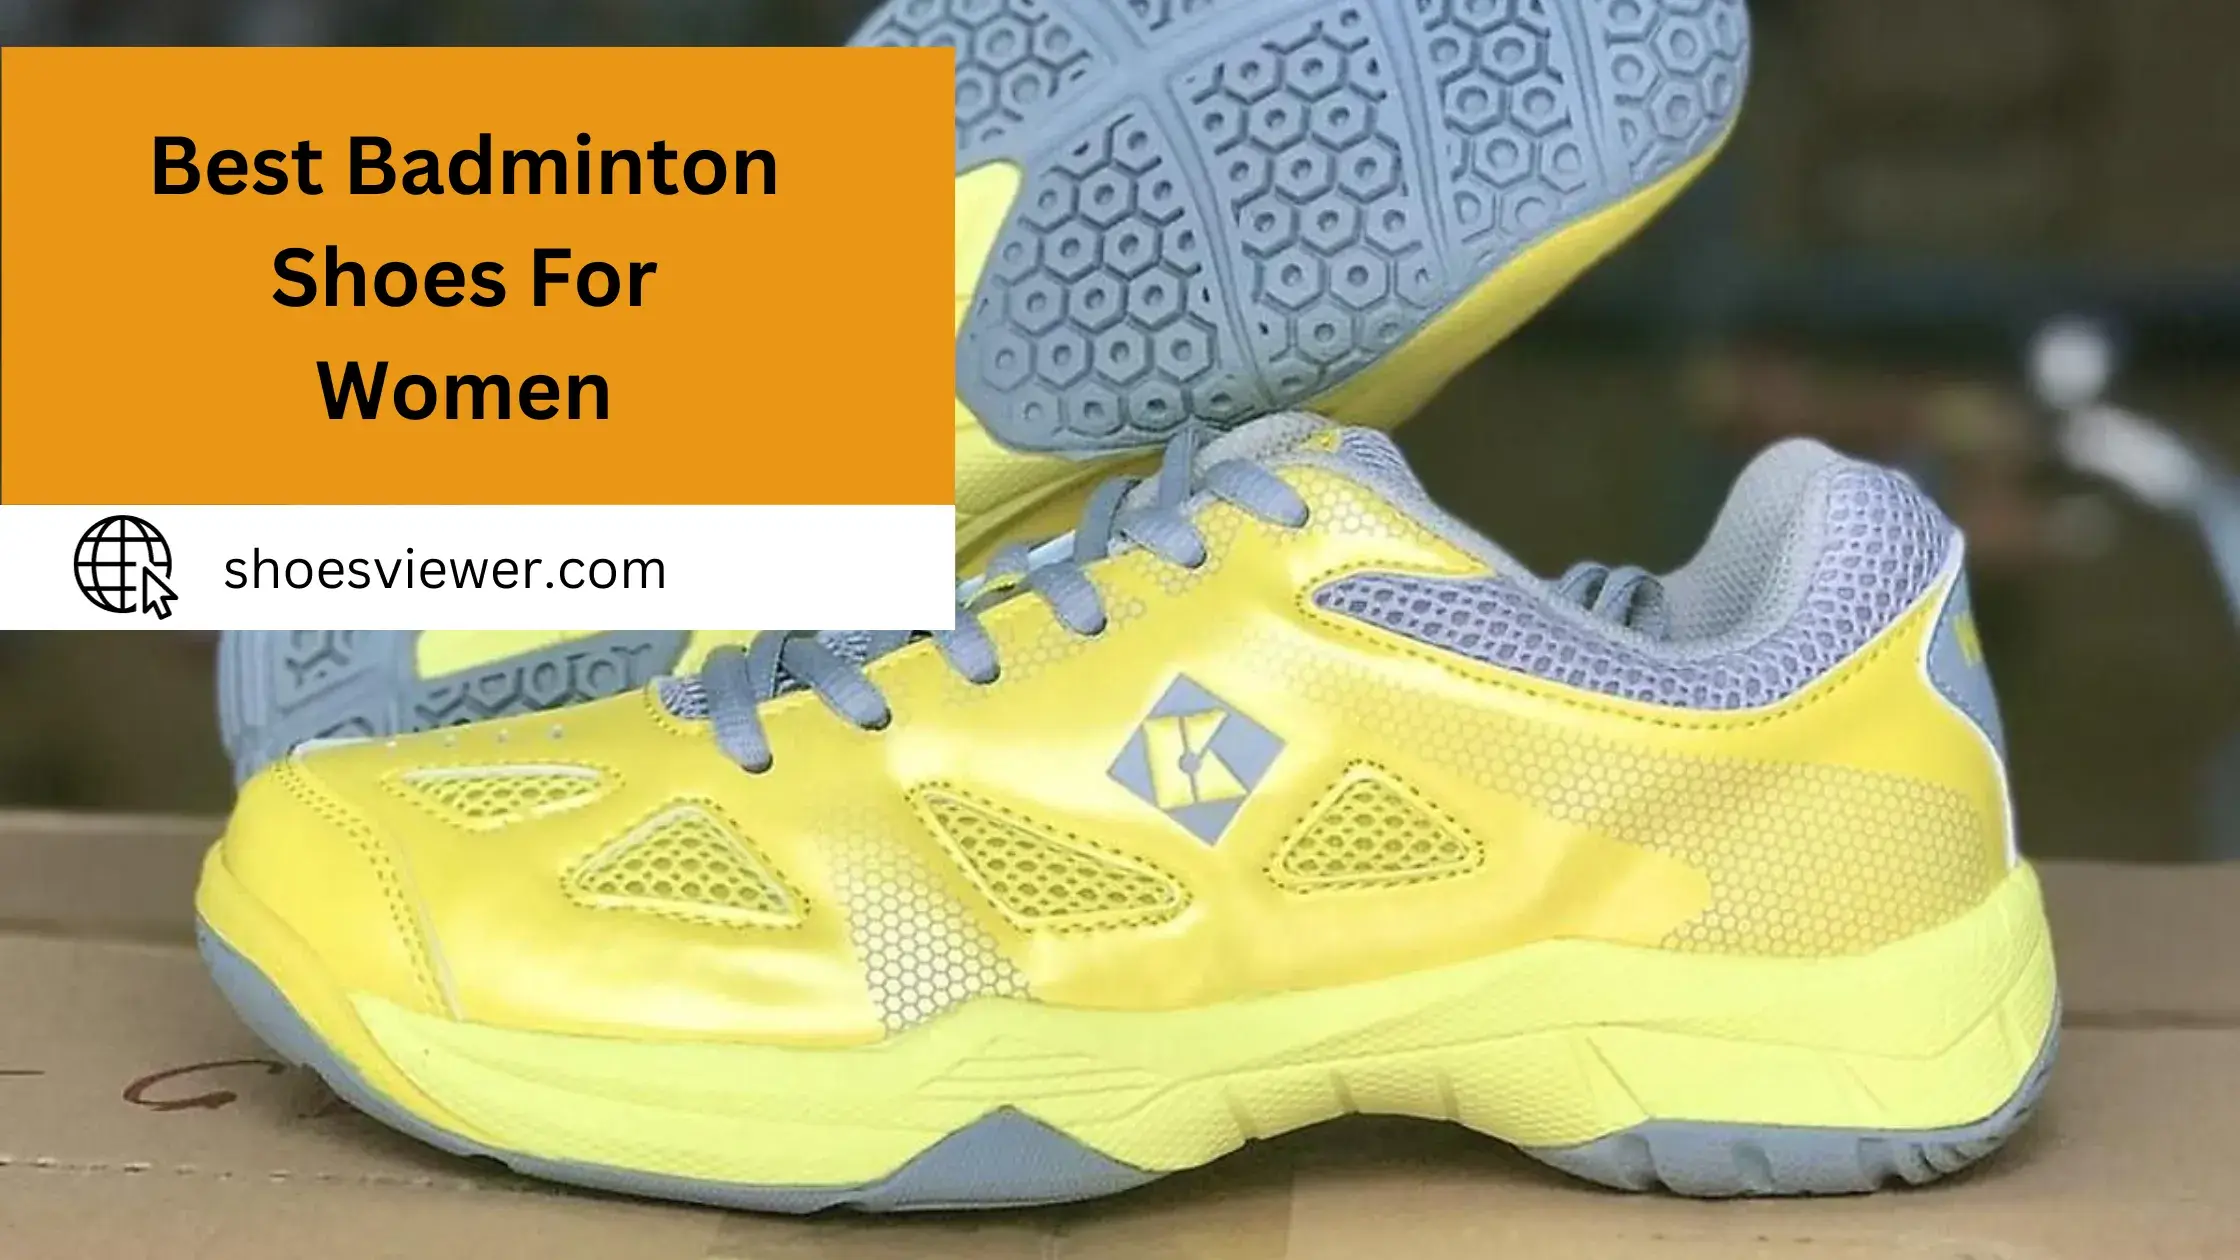 Best Badminton Shoes For Women - A Comprehensive Guide